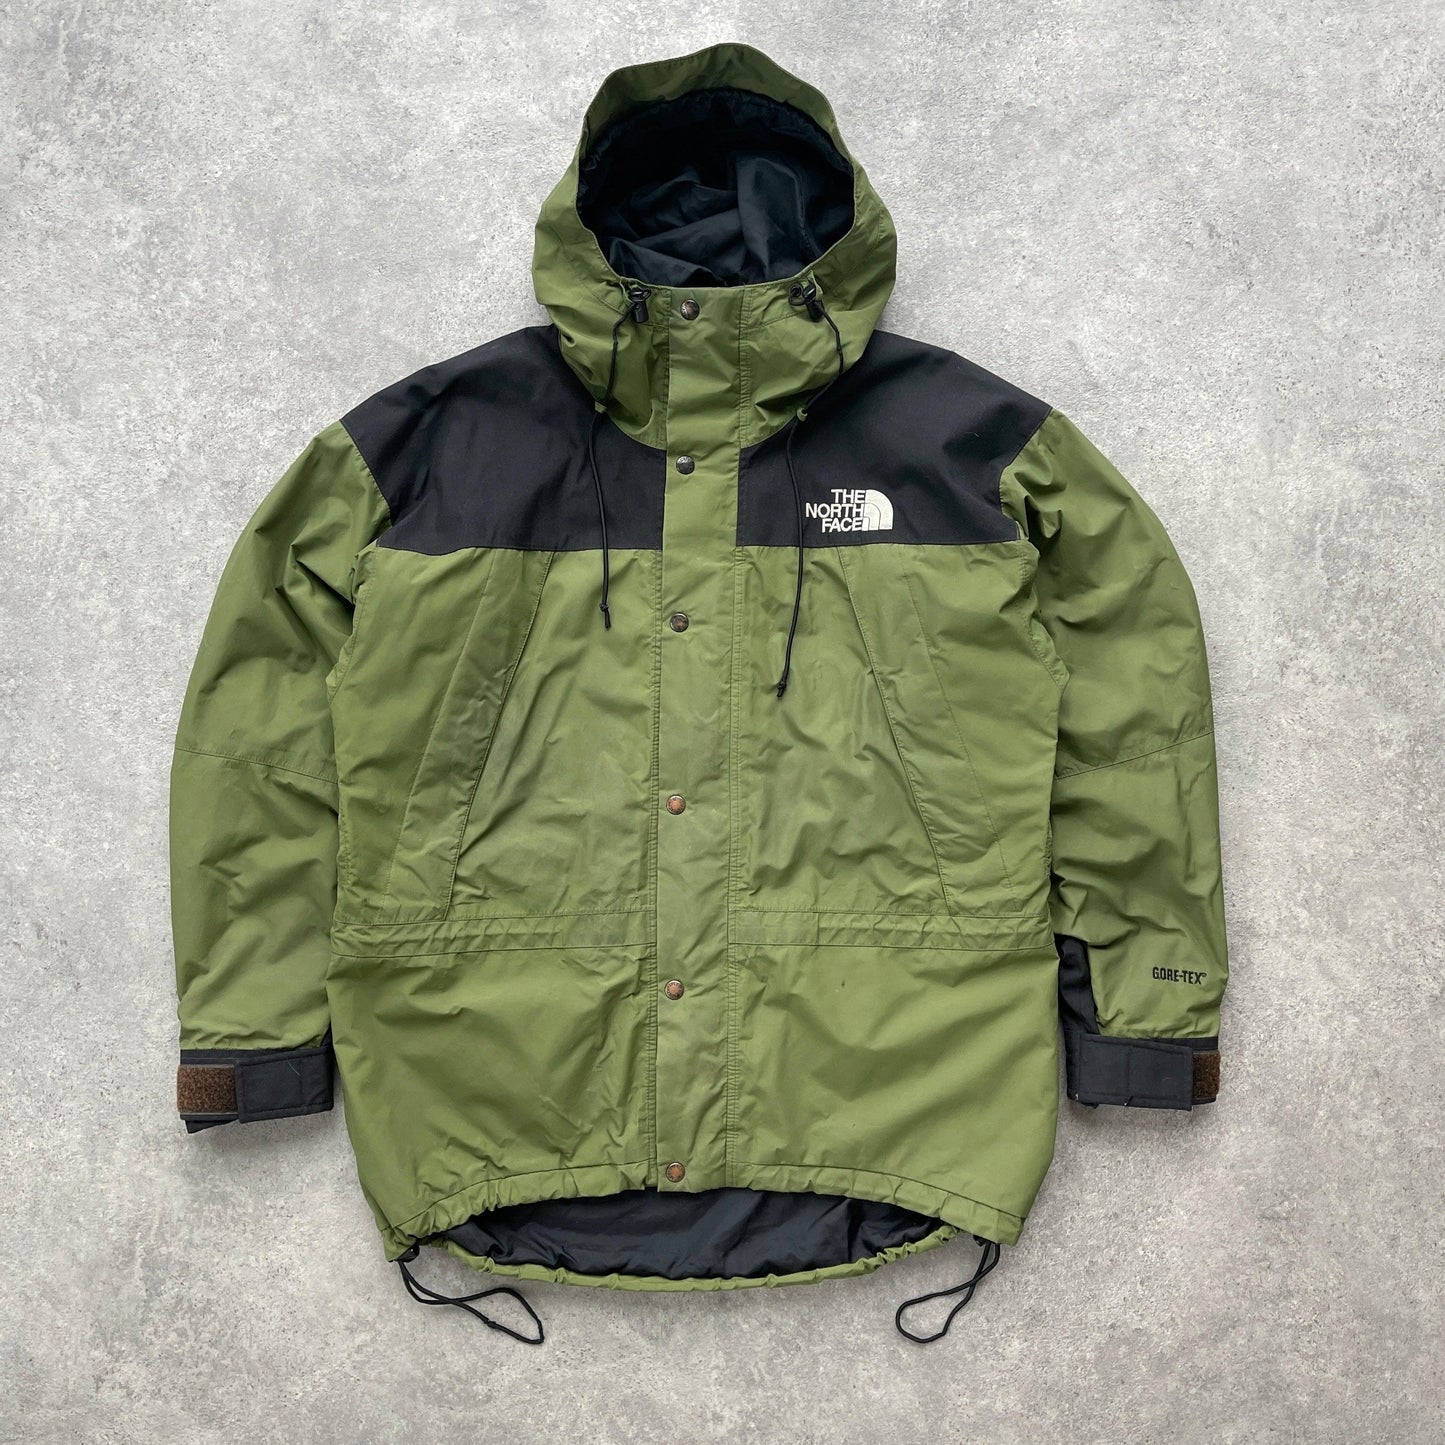 The North Face 1990s Gore-tex mountain jacket (M) - Known Source